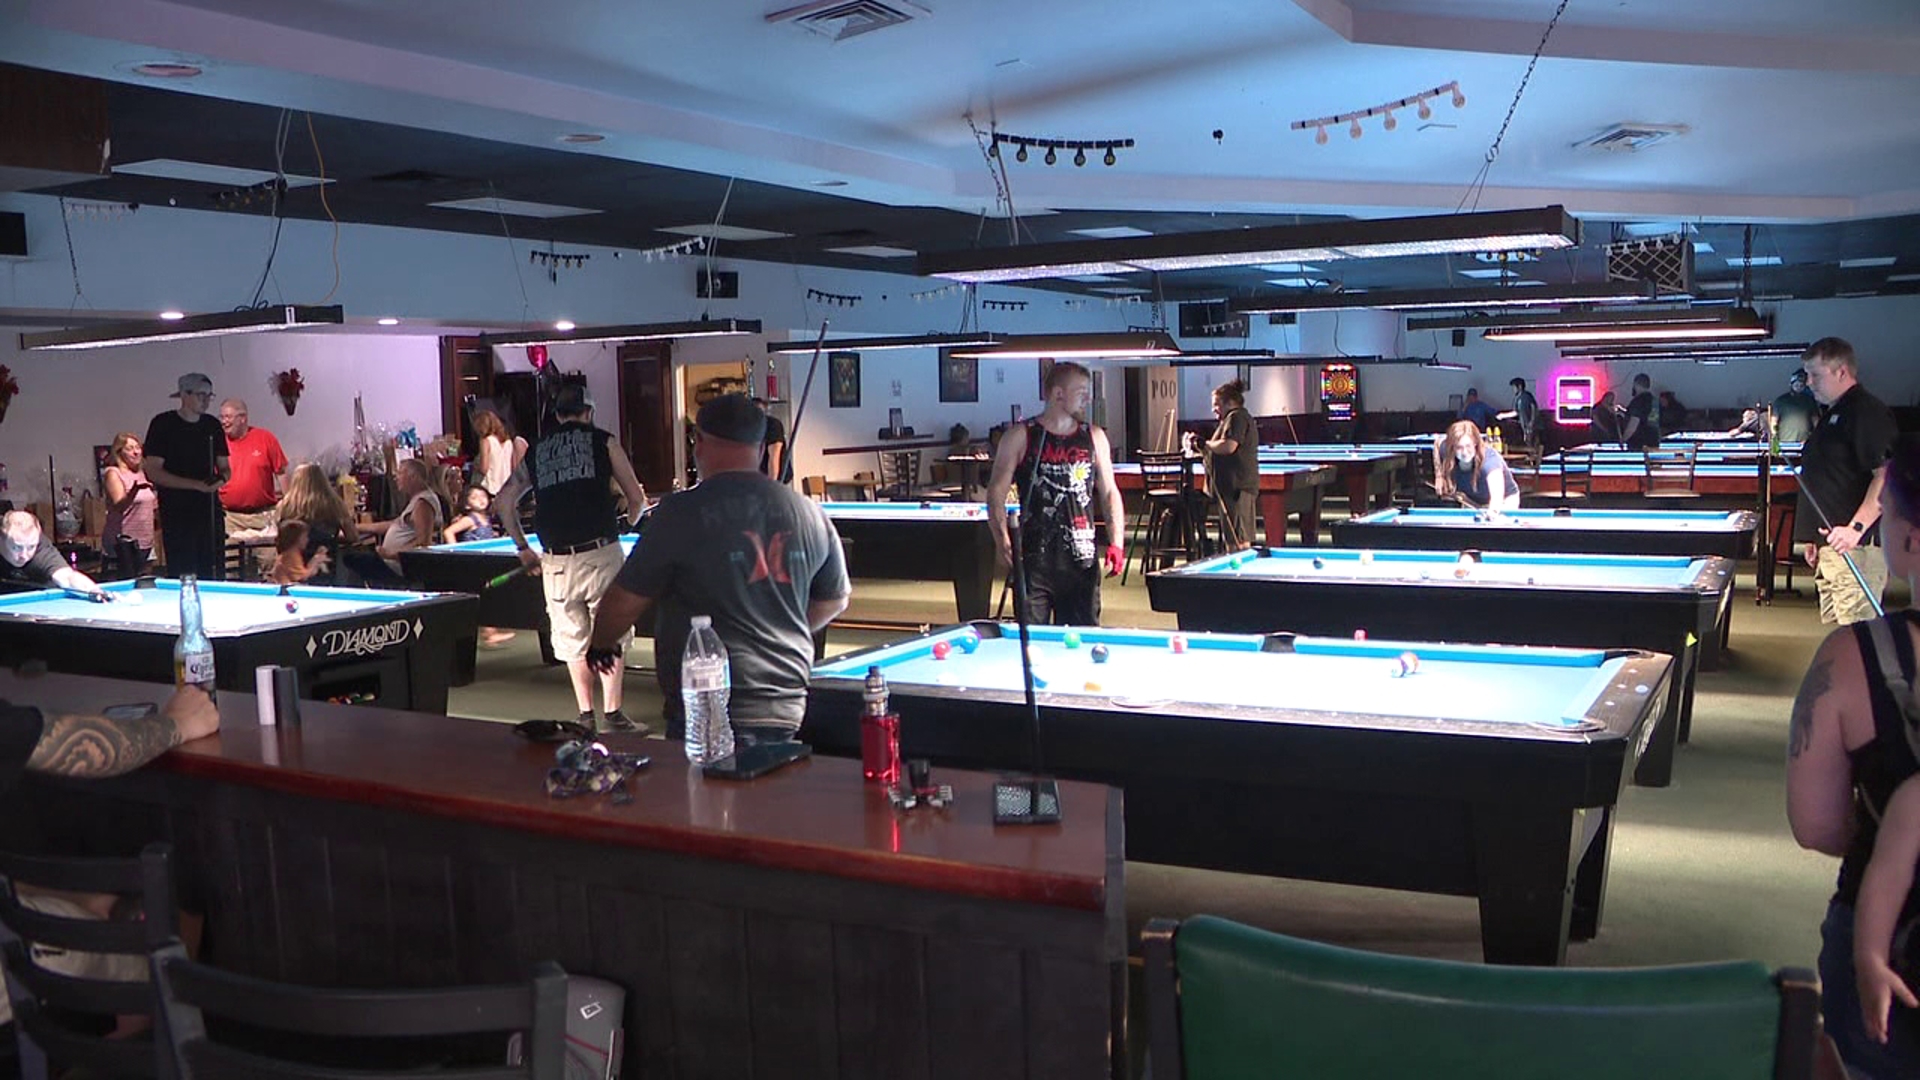 An eight-ball tournament was held at Eagle Billiards on Saturday to help one of the members of their pool league.